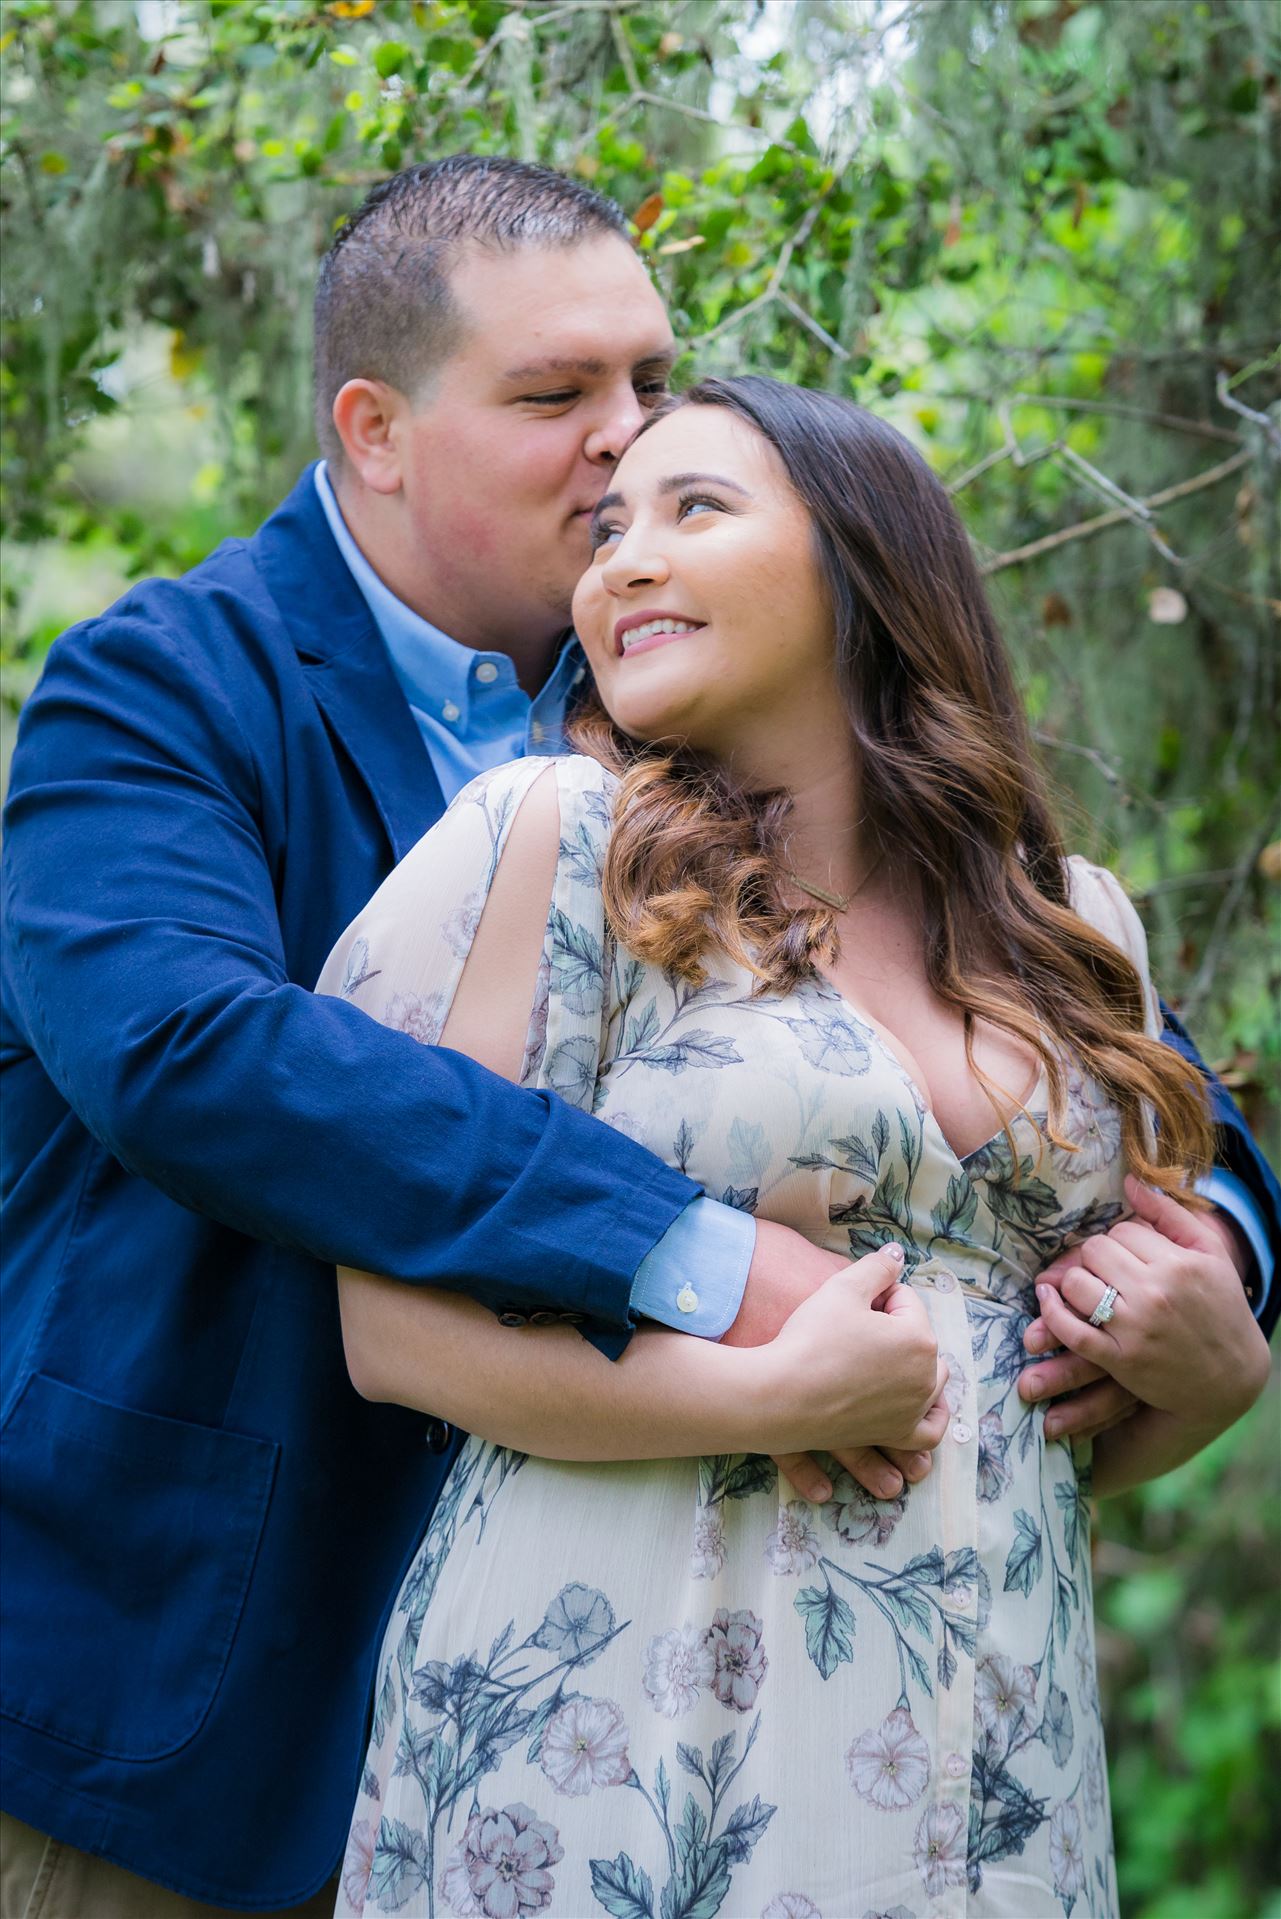 DSC_3152.JPG - Los Osos Oaks Nature Reserve Engagement Photography Session by Mirror's Edge Photography in magical forest setting by Sarah Williams